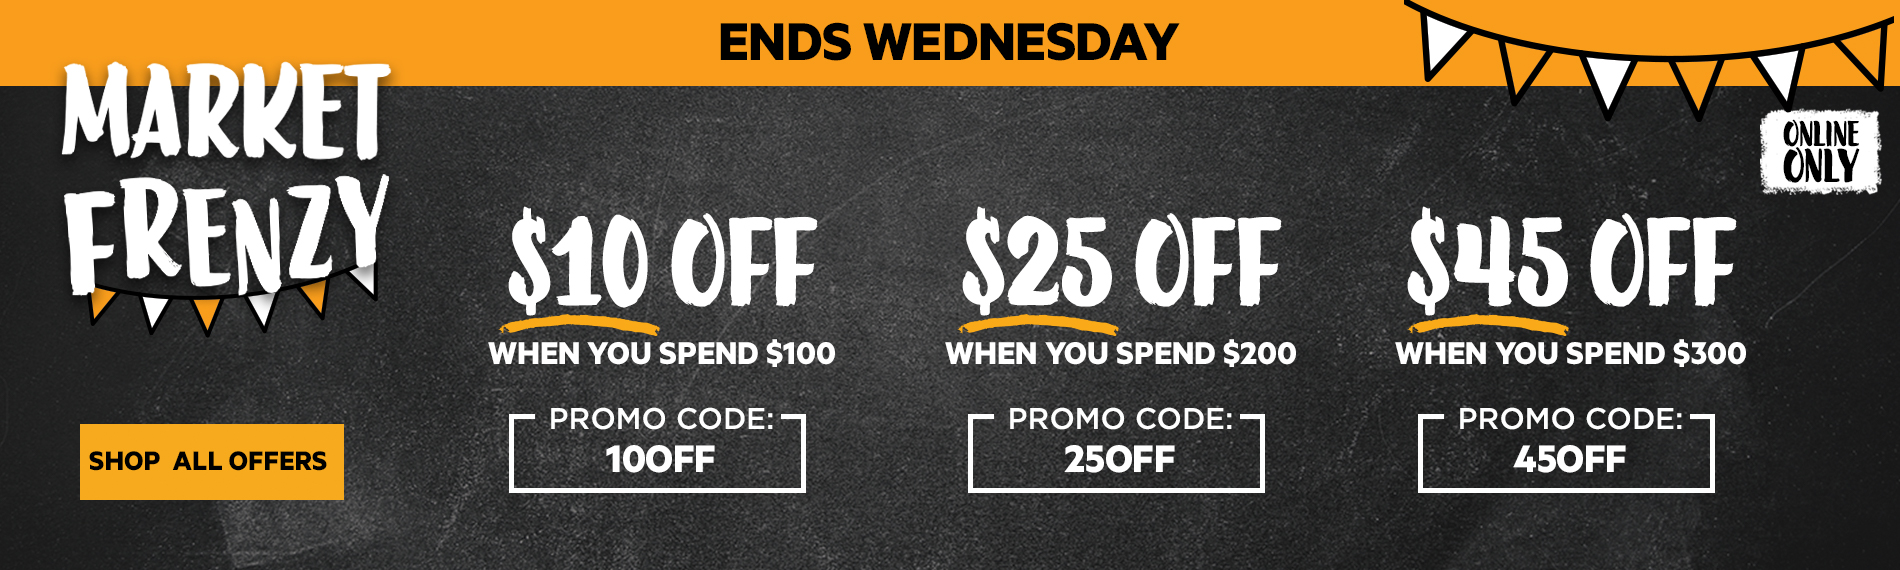 First Choice Liquor spend & save up to $45 OFF with discount codes